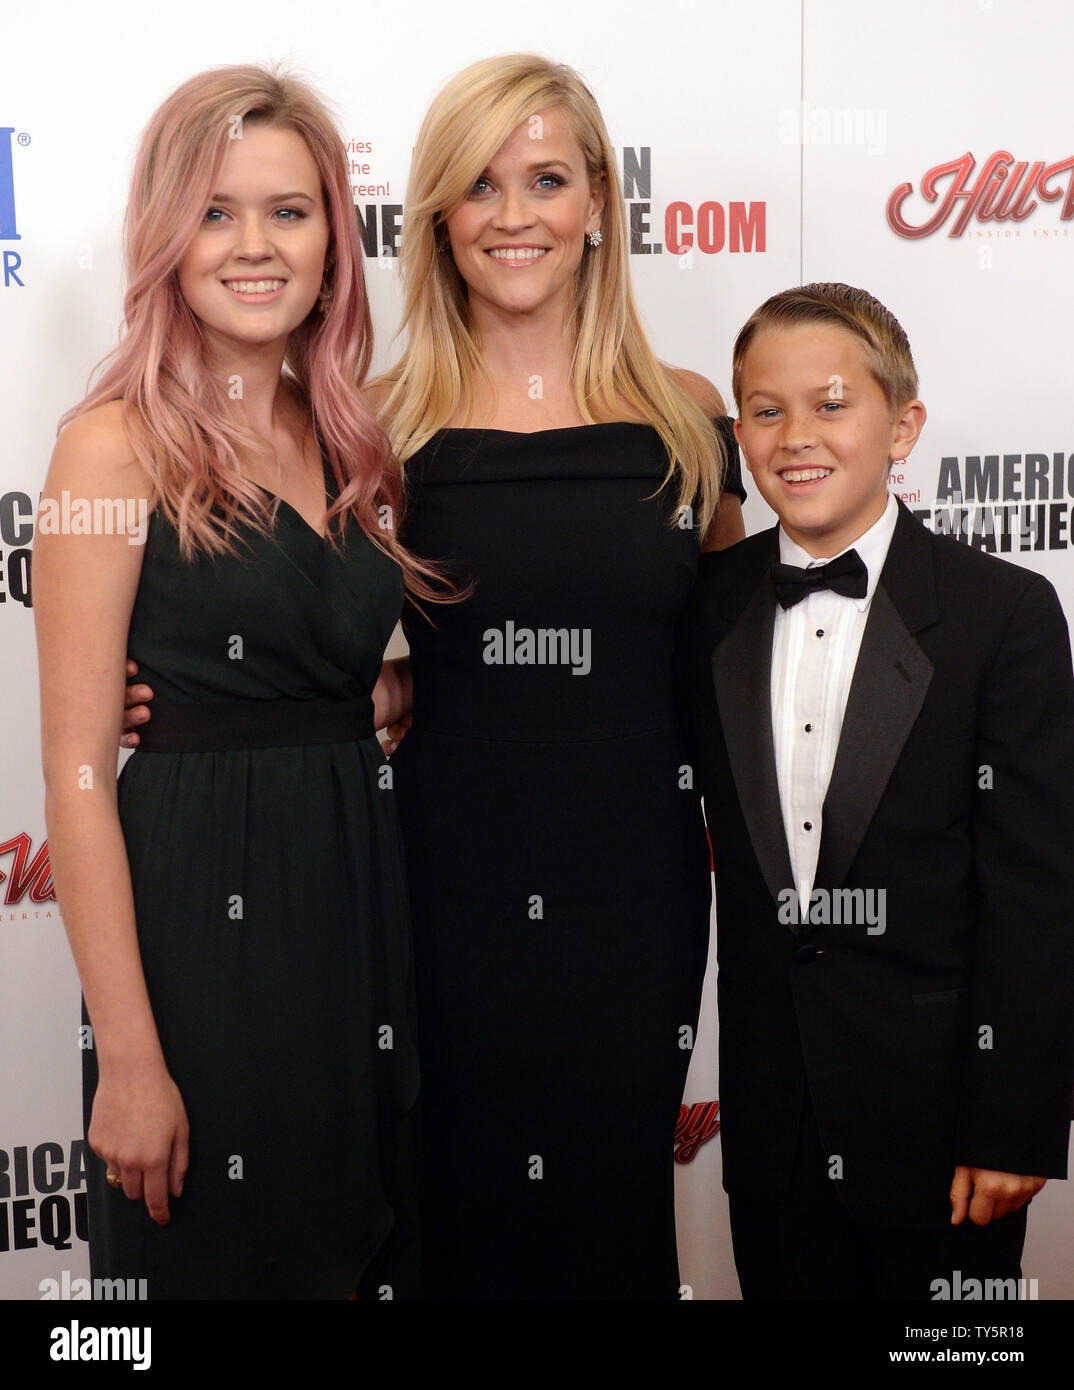 Honoree Reese Witherspoon and her daughter Ava Phillippe (L) and son Deacon Phillippe attends the 29th annual American Cinematheque gala at the Hyatt Regency Century Plaza in Los Angeles on October 30, 2015.  Photo by Jim Ruymen/UPI Stock Photo